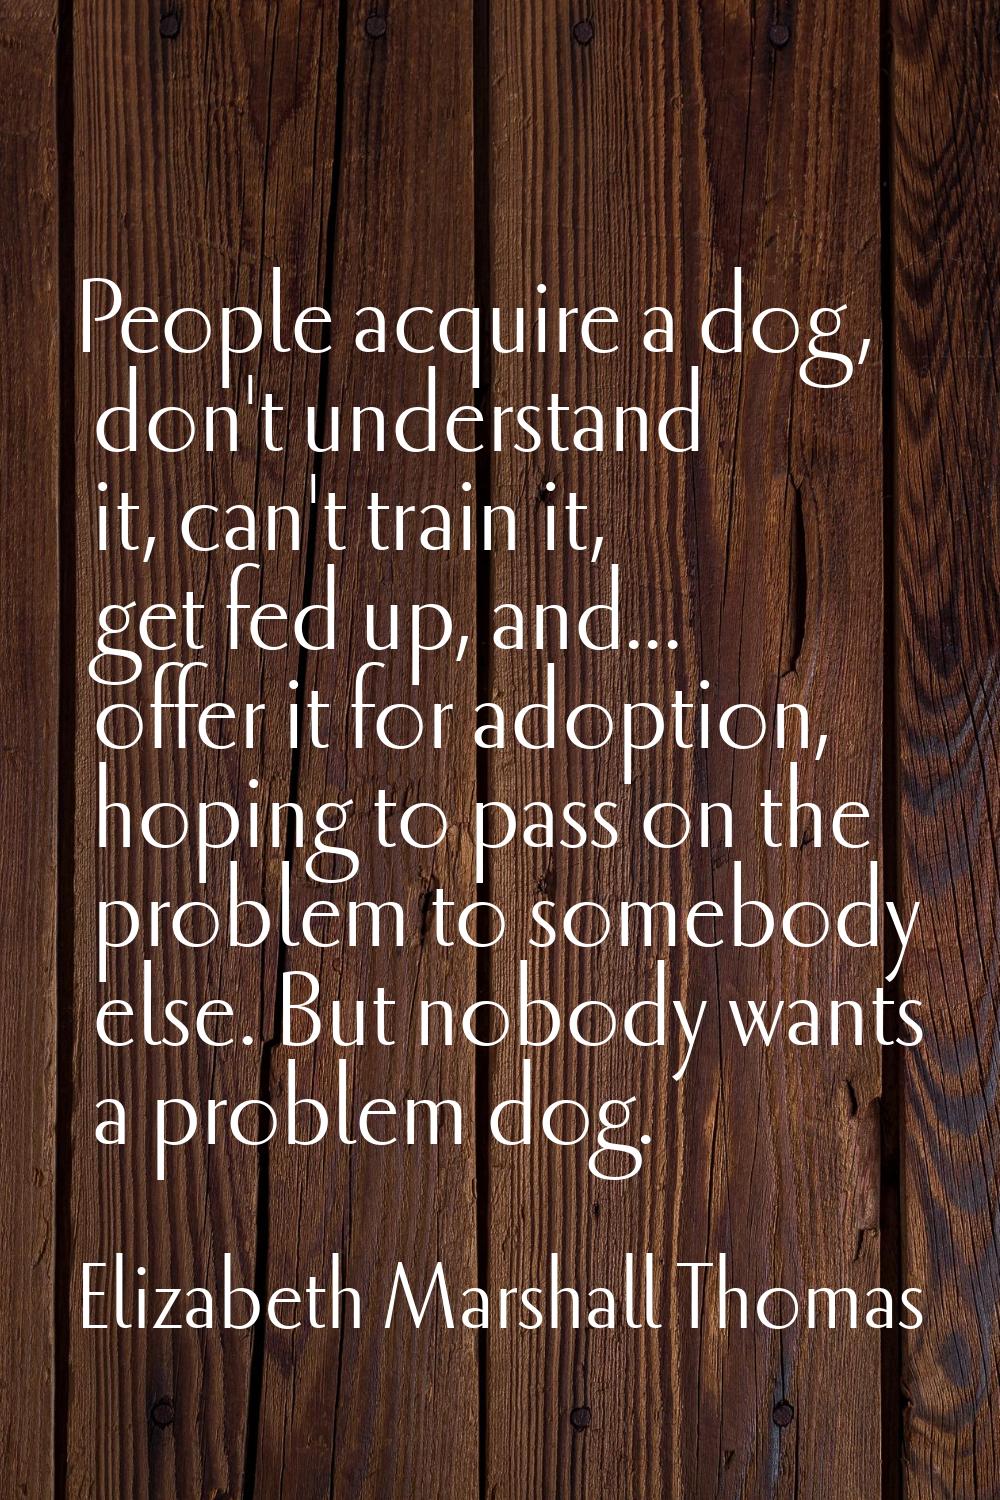 People acquire a dog, don't understand it, can't train it, get fed up, and... offer it for adoption